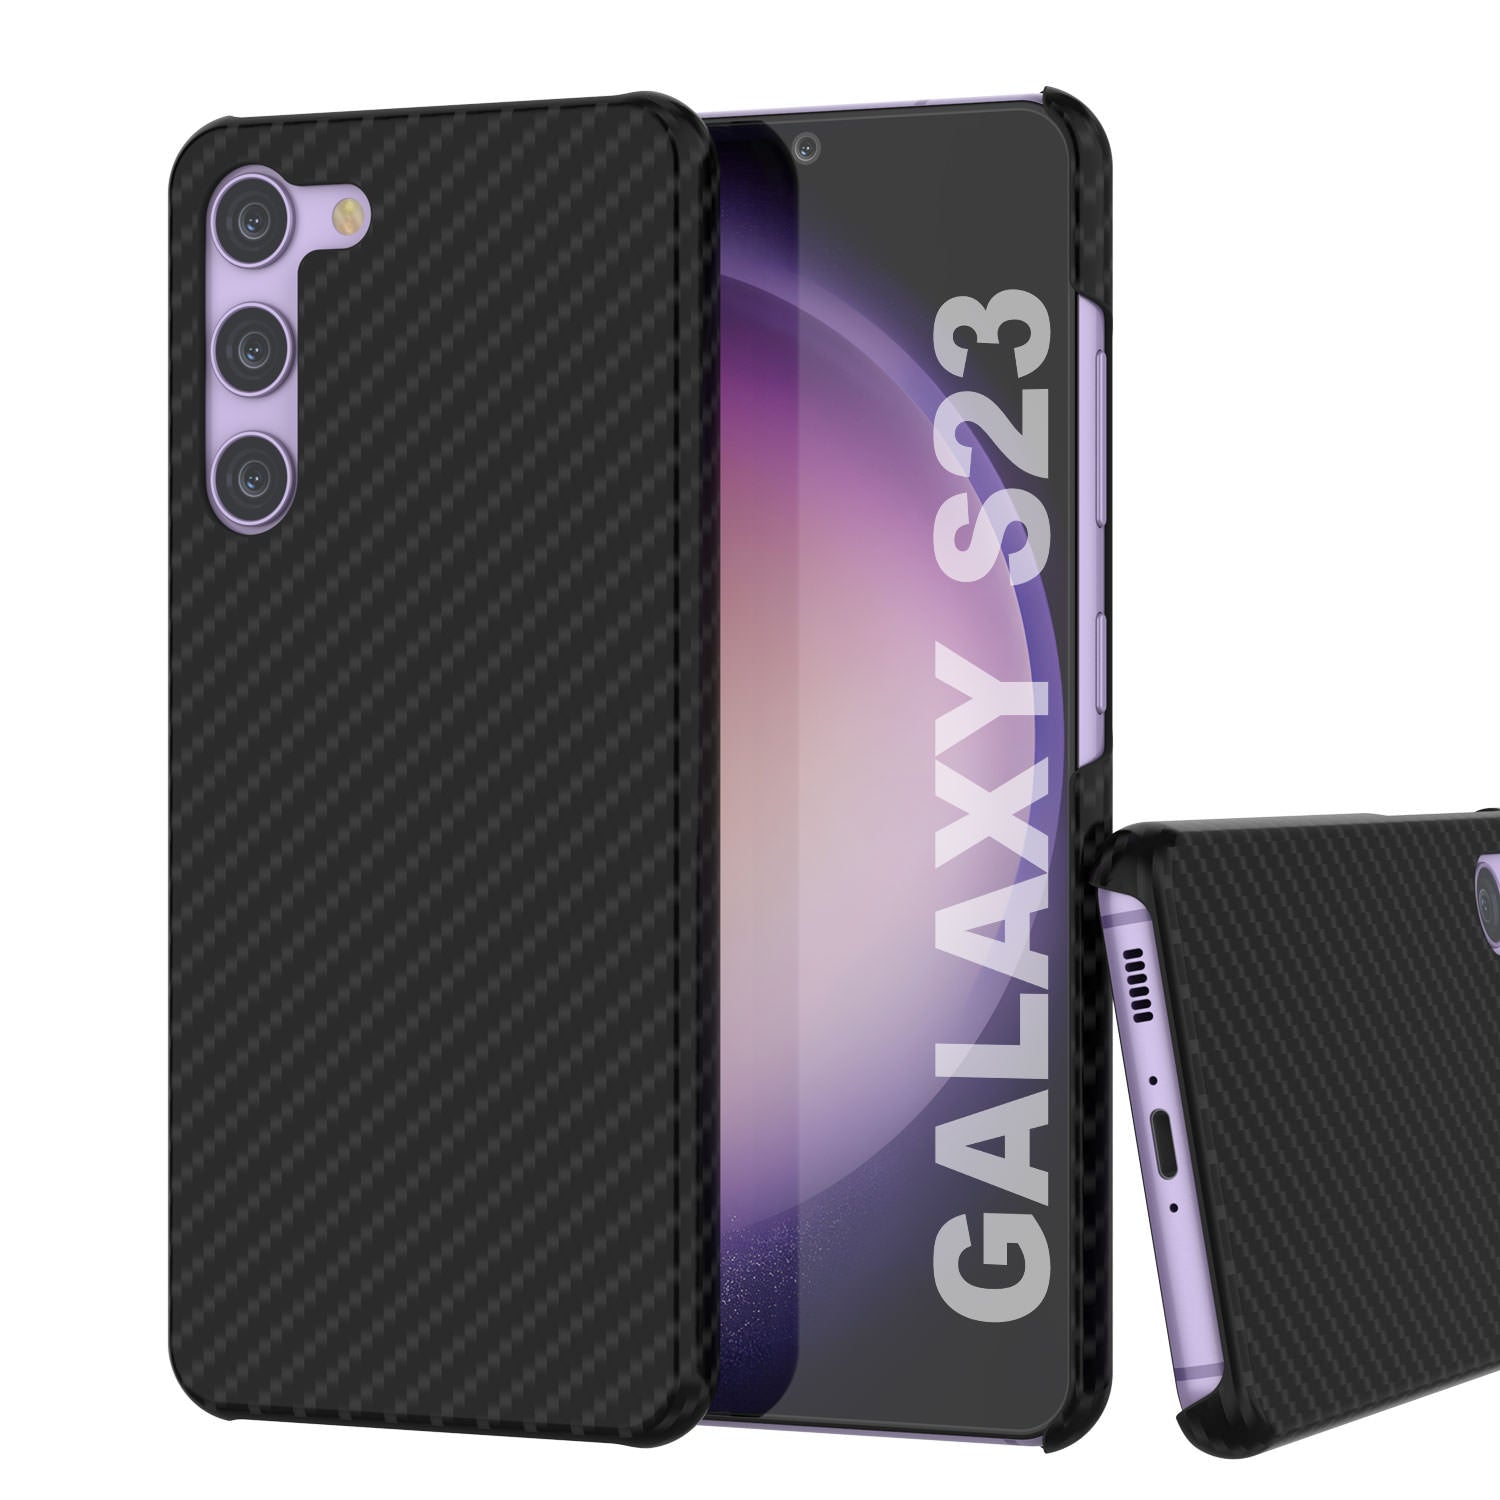 Galaxy S24 Case, Punkcase CarbonShield, Heavy Duty & Ultra Thin Cover [shockproof][non slip] [Purple]